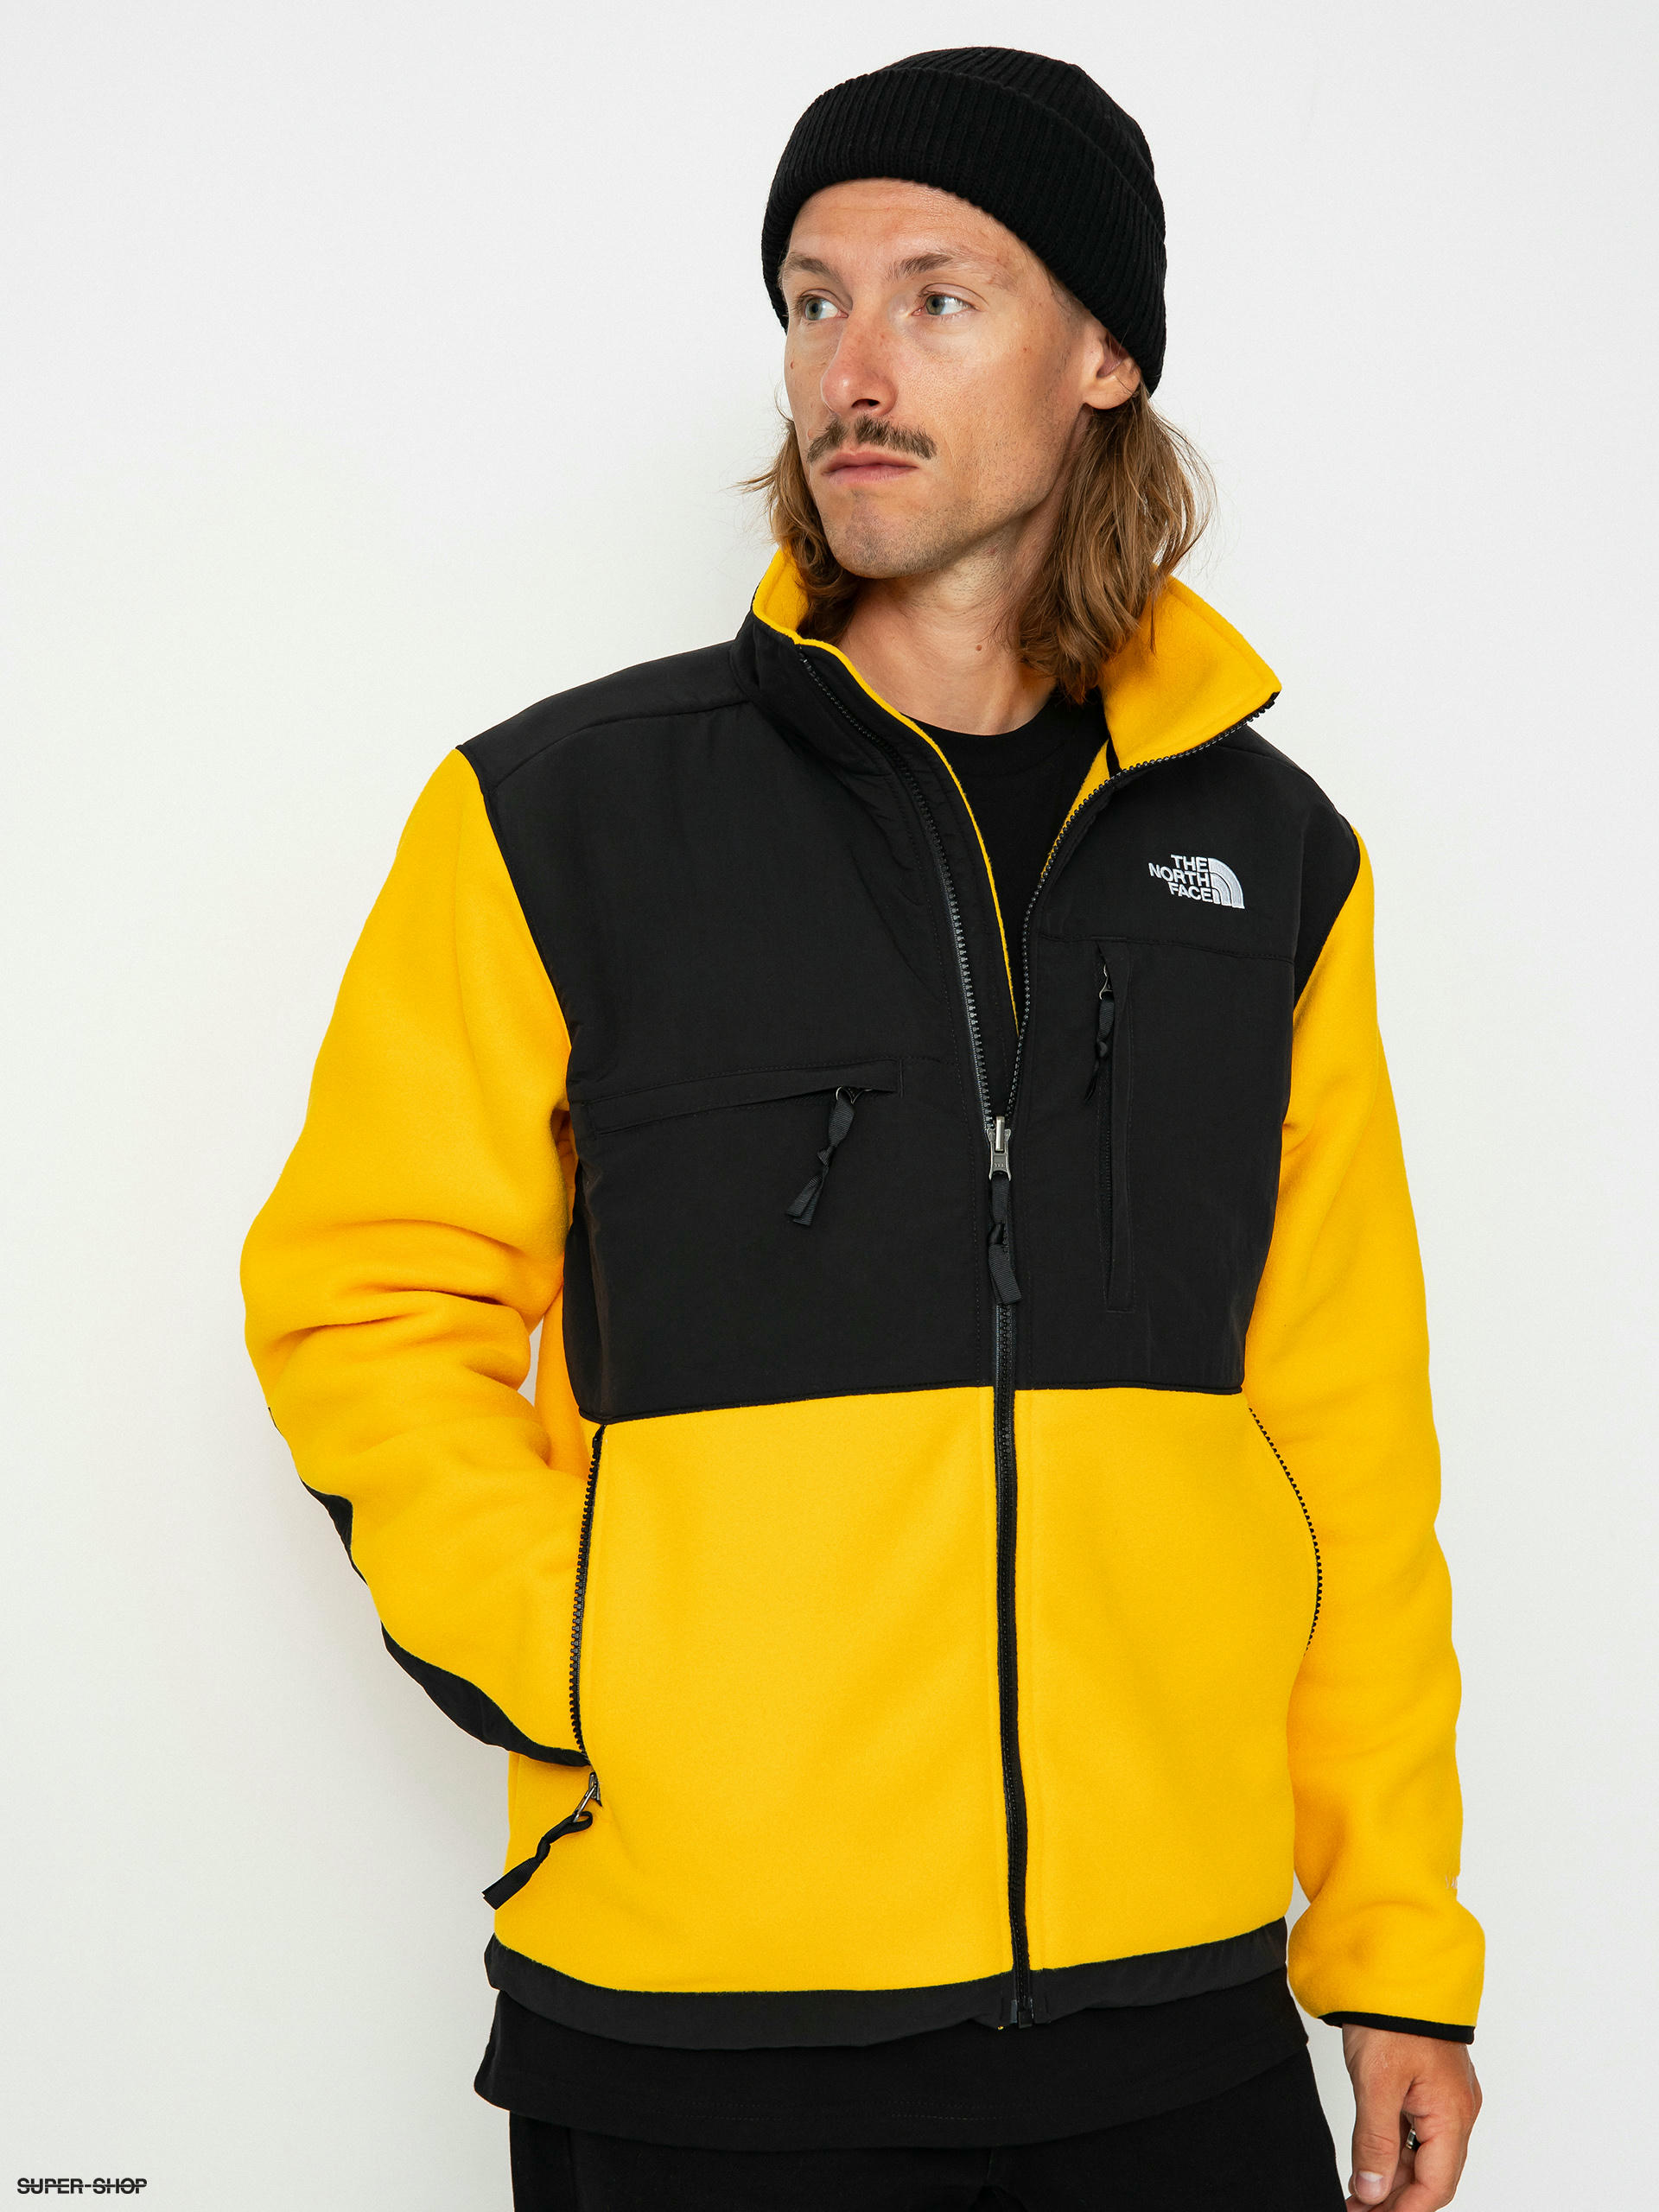 The North Face Denali Jackets, Gloves, and More